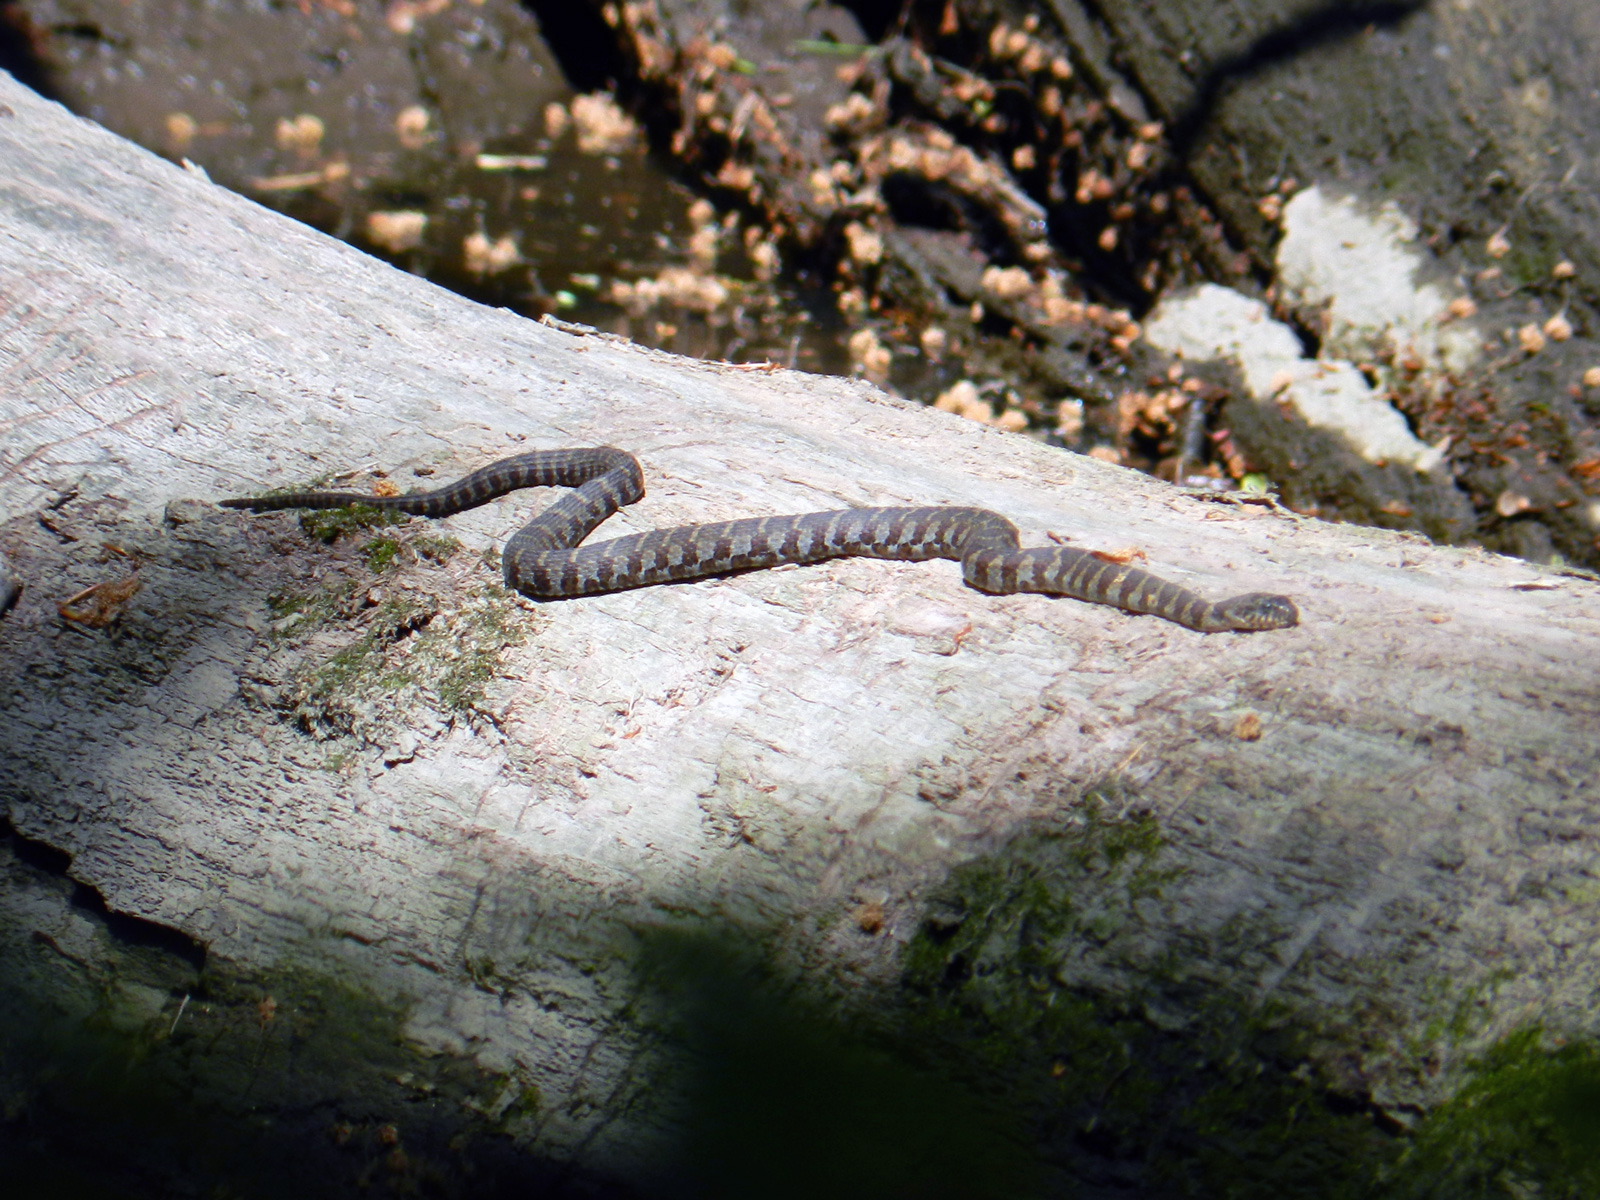 Brown banded snake sunning itself on a log